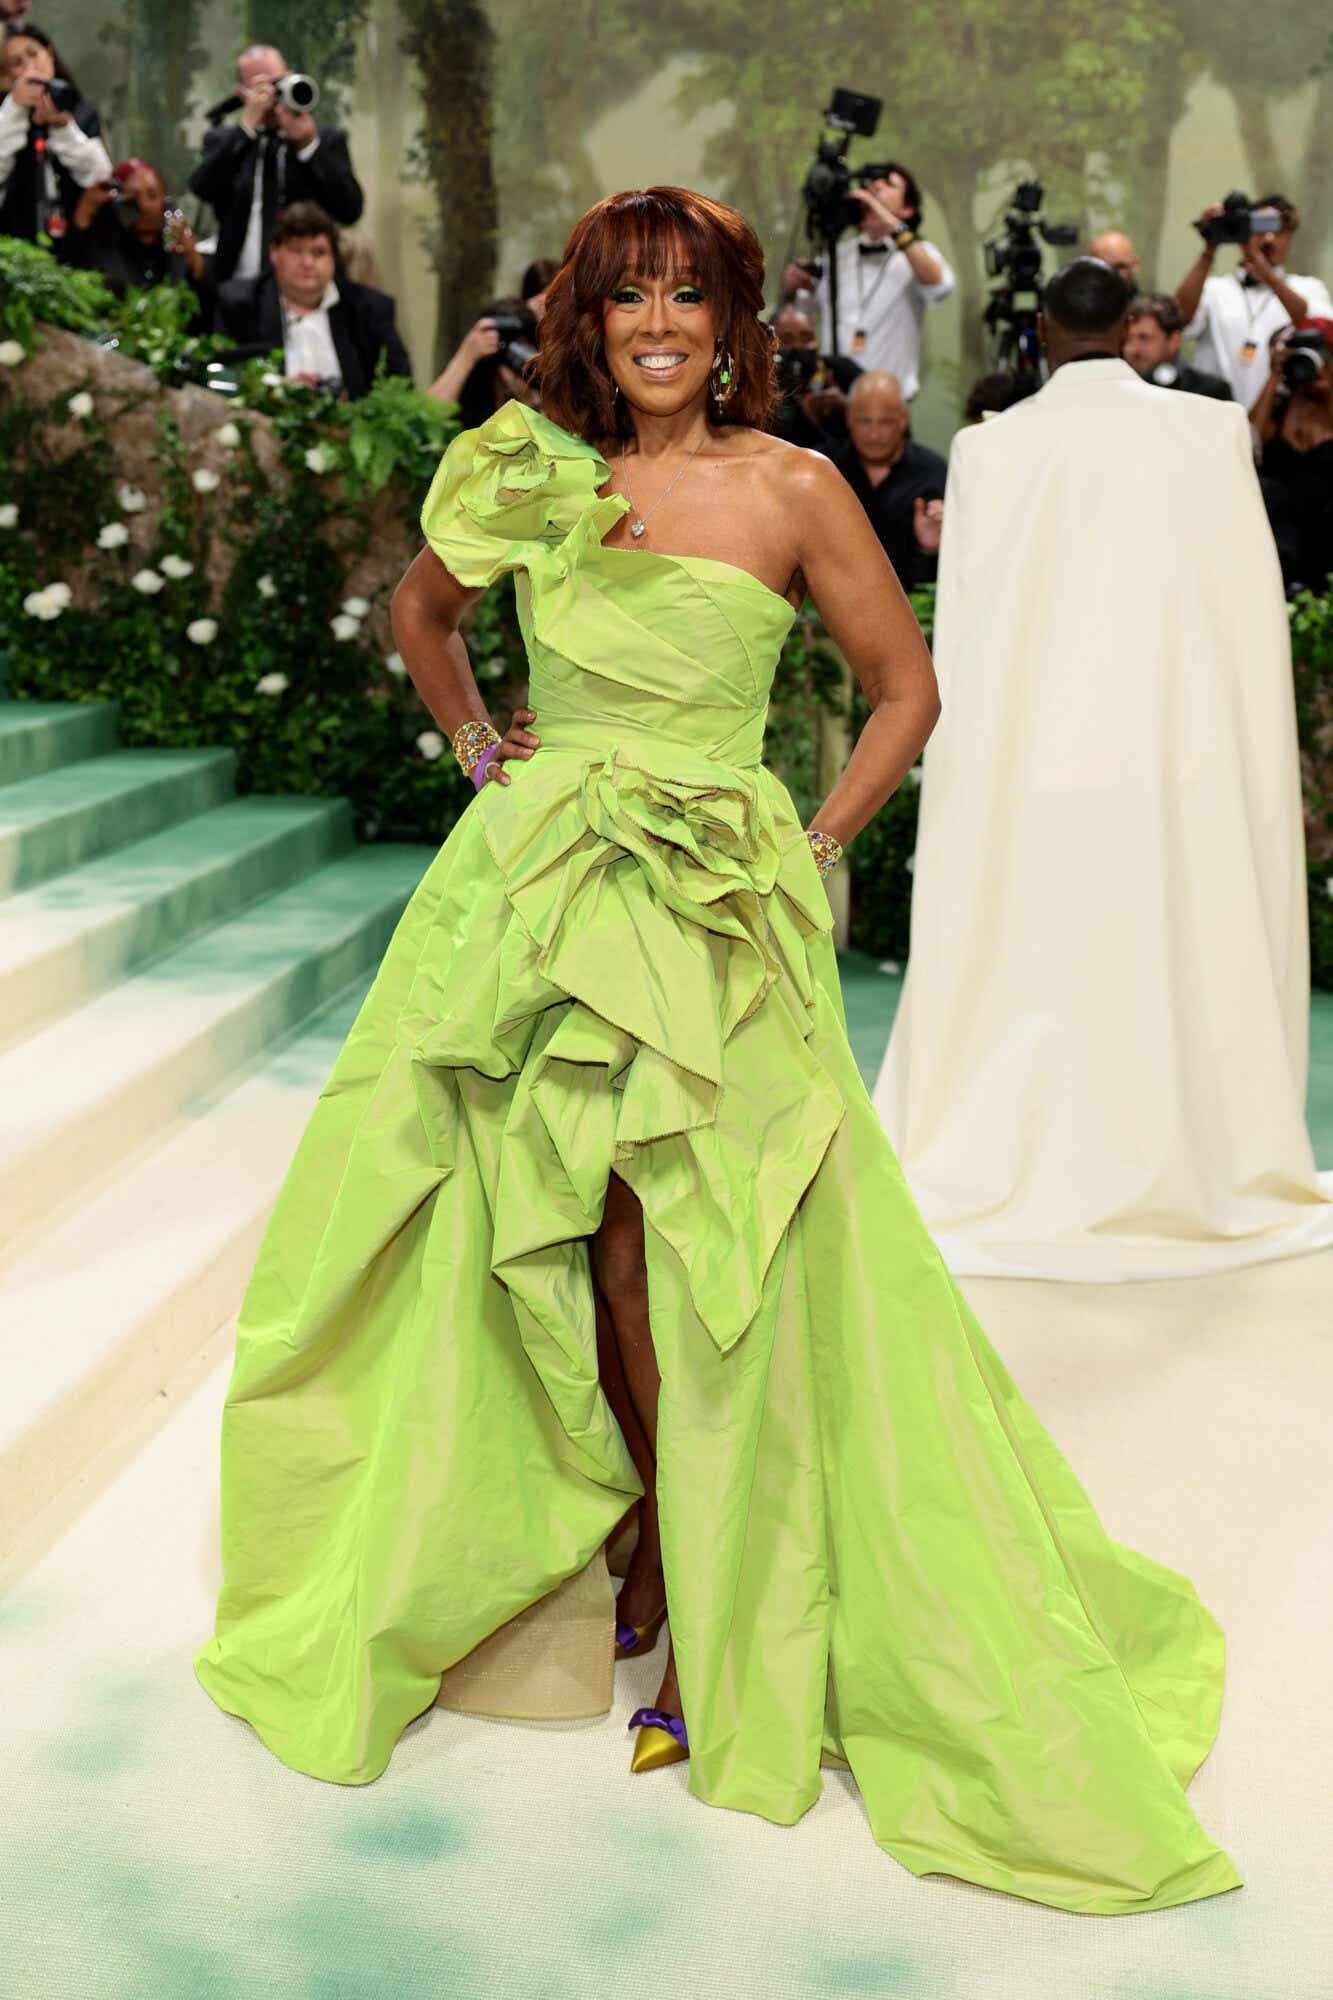 Gayle King wears a lime green one-shoulder dress with a voluminous high-low skirt and a ruffled shoulder detail.